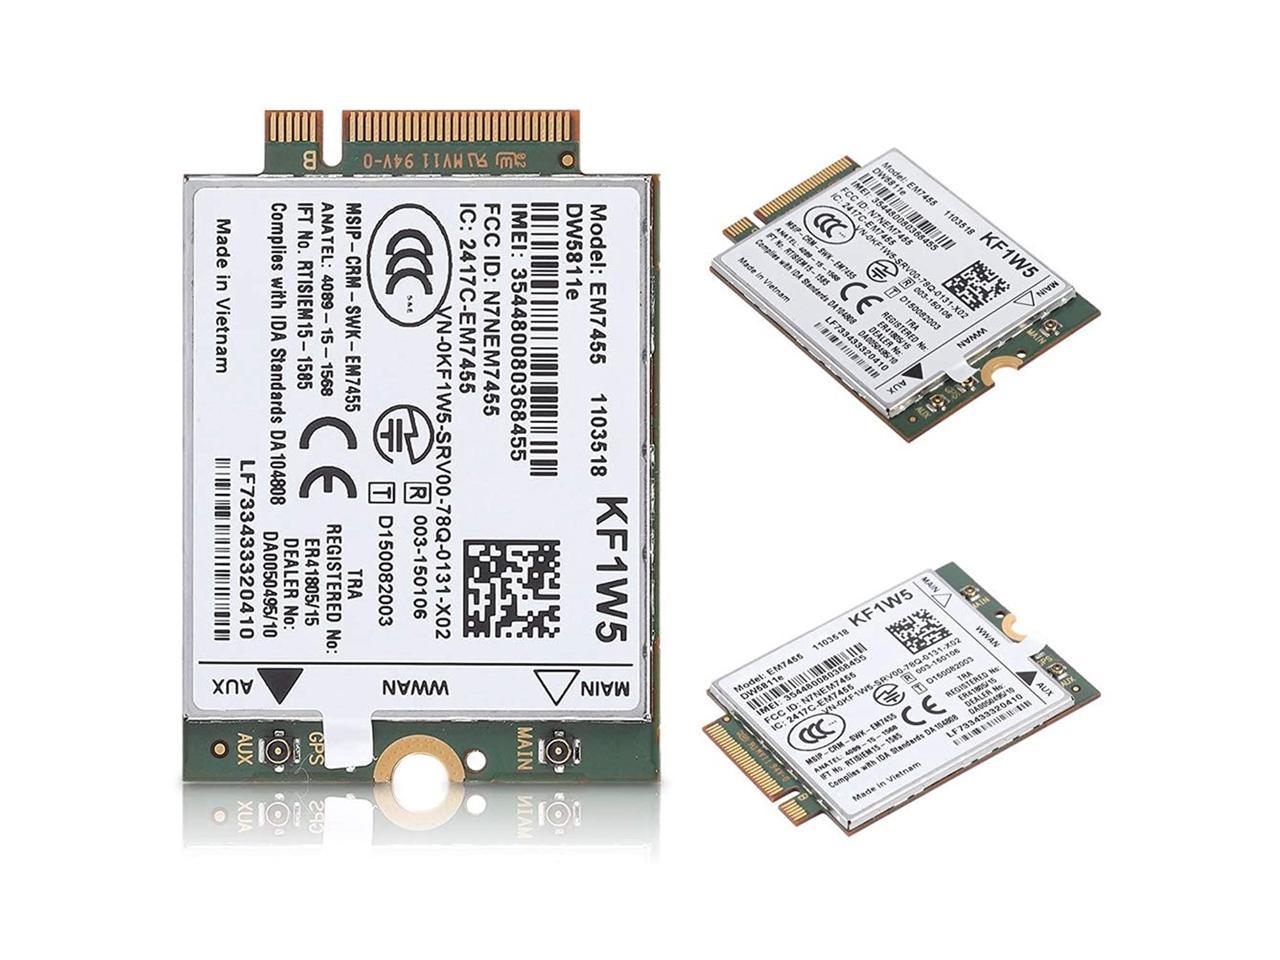 EM7455 Card 50 Mbps Max Upload Speed Wireless 4G LTE WWAN NGFF Module for Dell Latitude Series 300 Mbps Max Download Speed